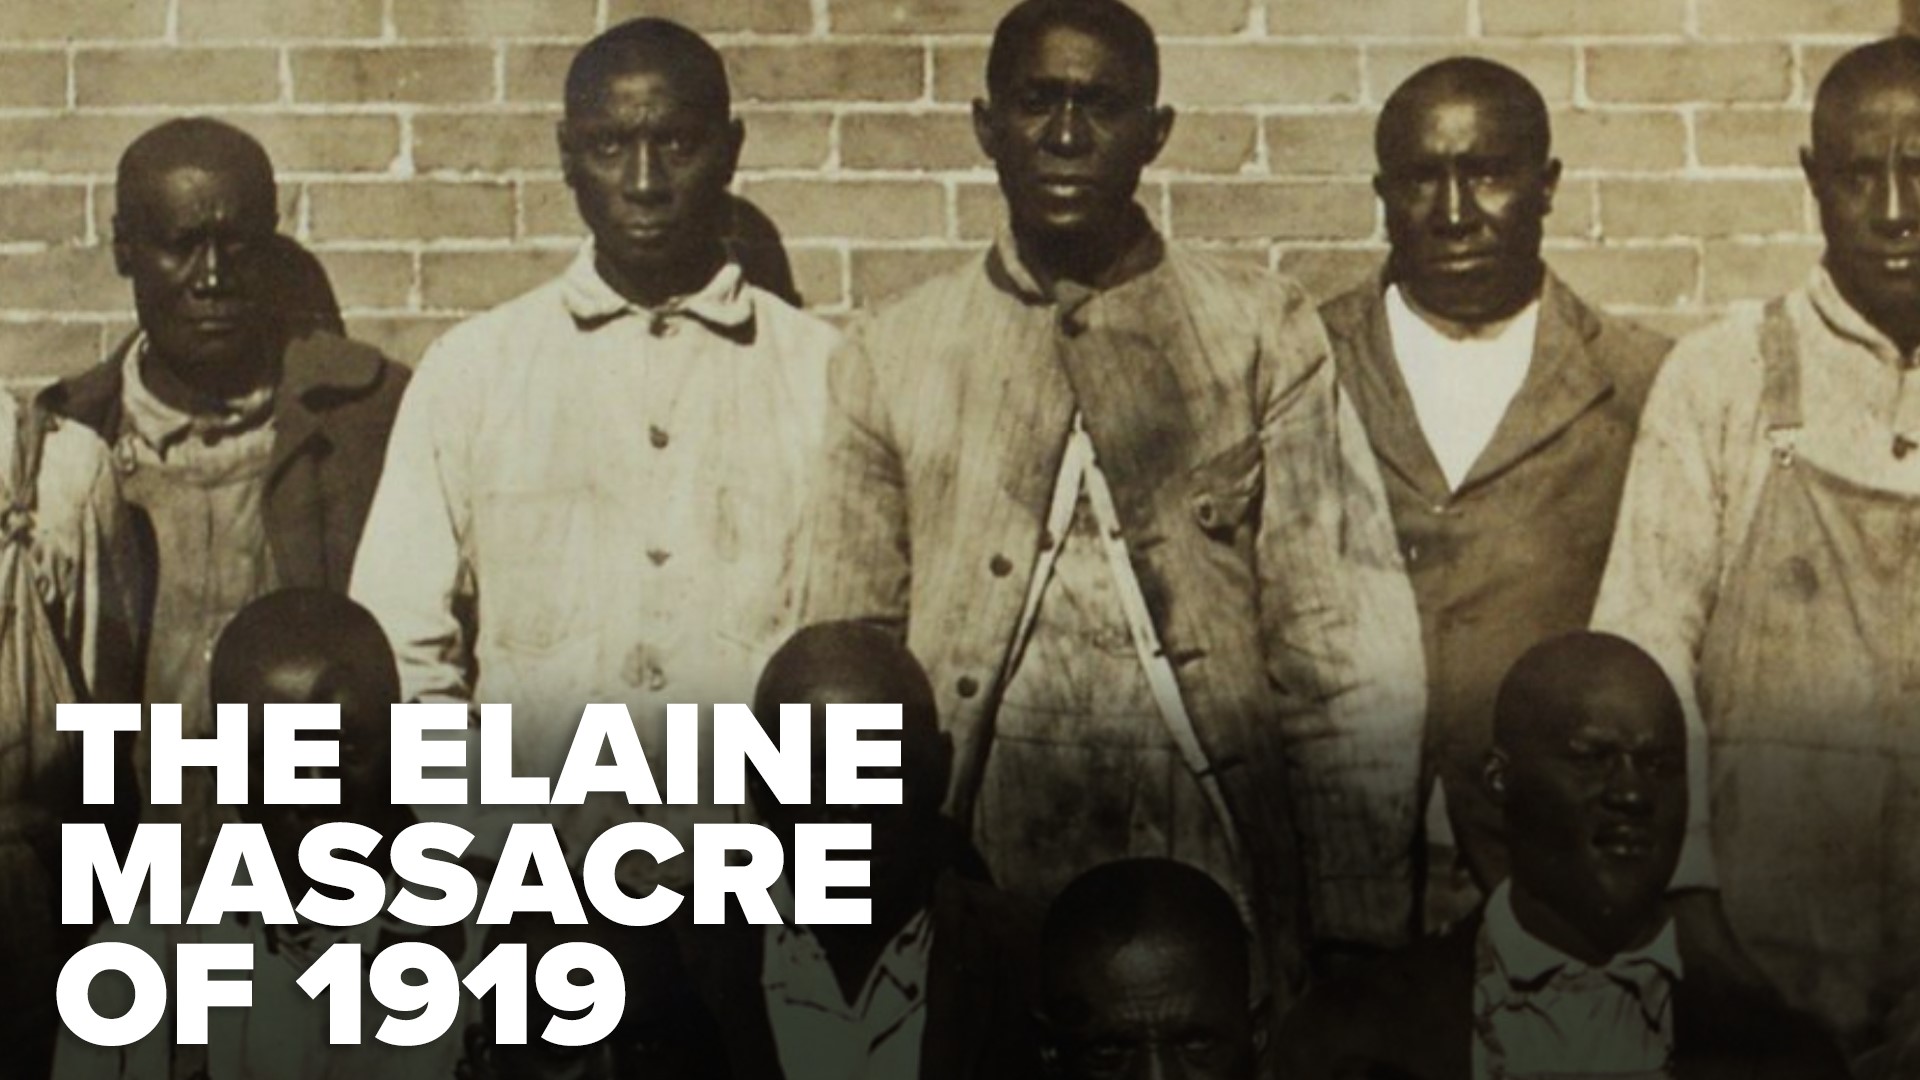 In 1919, the largest mass terror lynchings in American history took place in Elaine, Arkansas. This video looks at new documents and an upcoming film on the tragedy.